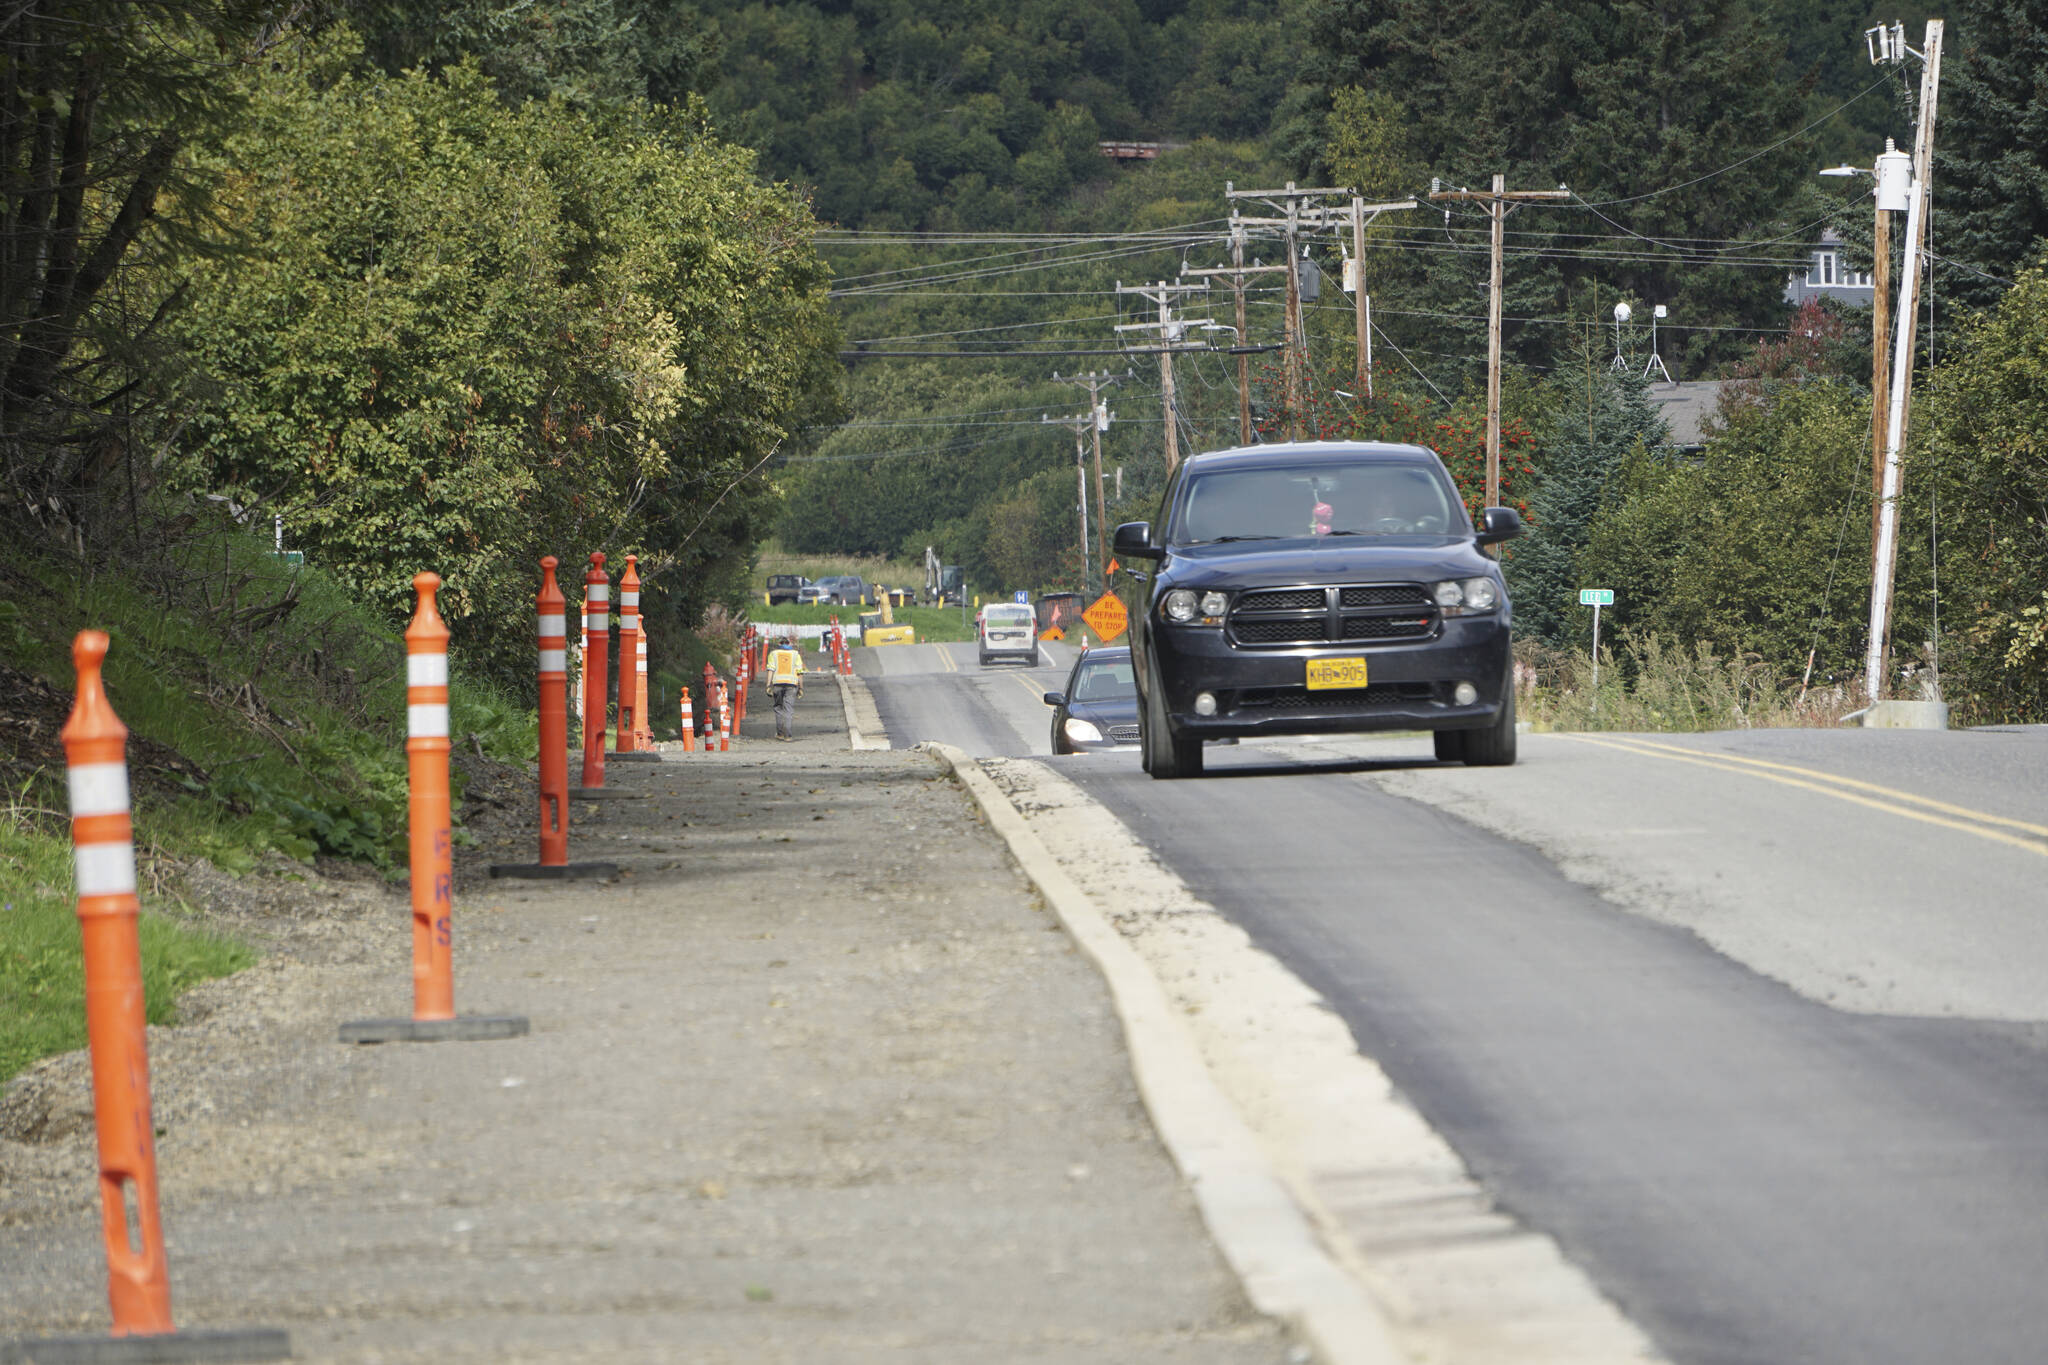 Photo by Michael Armstrong/Homer News
Work on a new sidewalk and widening of the street is almost done on Main Street north of Pioneer Avenue on Tuesday, Sept. 13, in Homer. At the Homer City Council meeting on Monday, a blind man, Pat Case, praised the work to make Main Street more accessible, but said more work needs to be done on other streets.